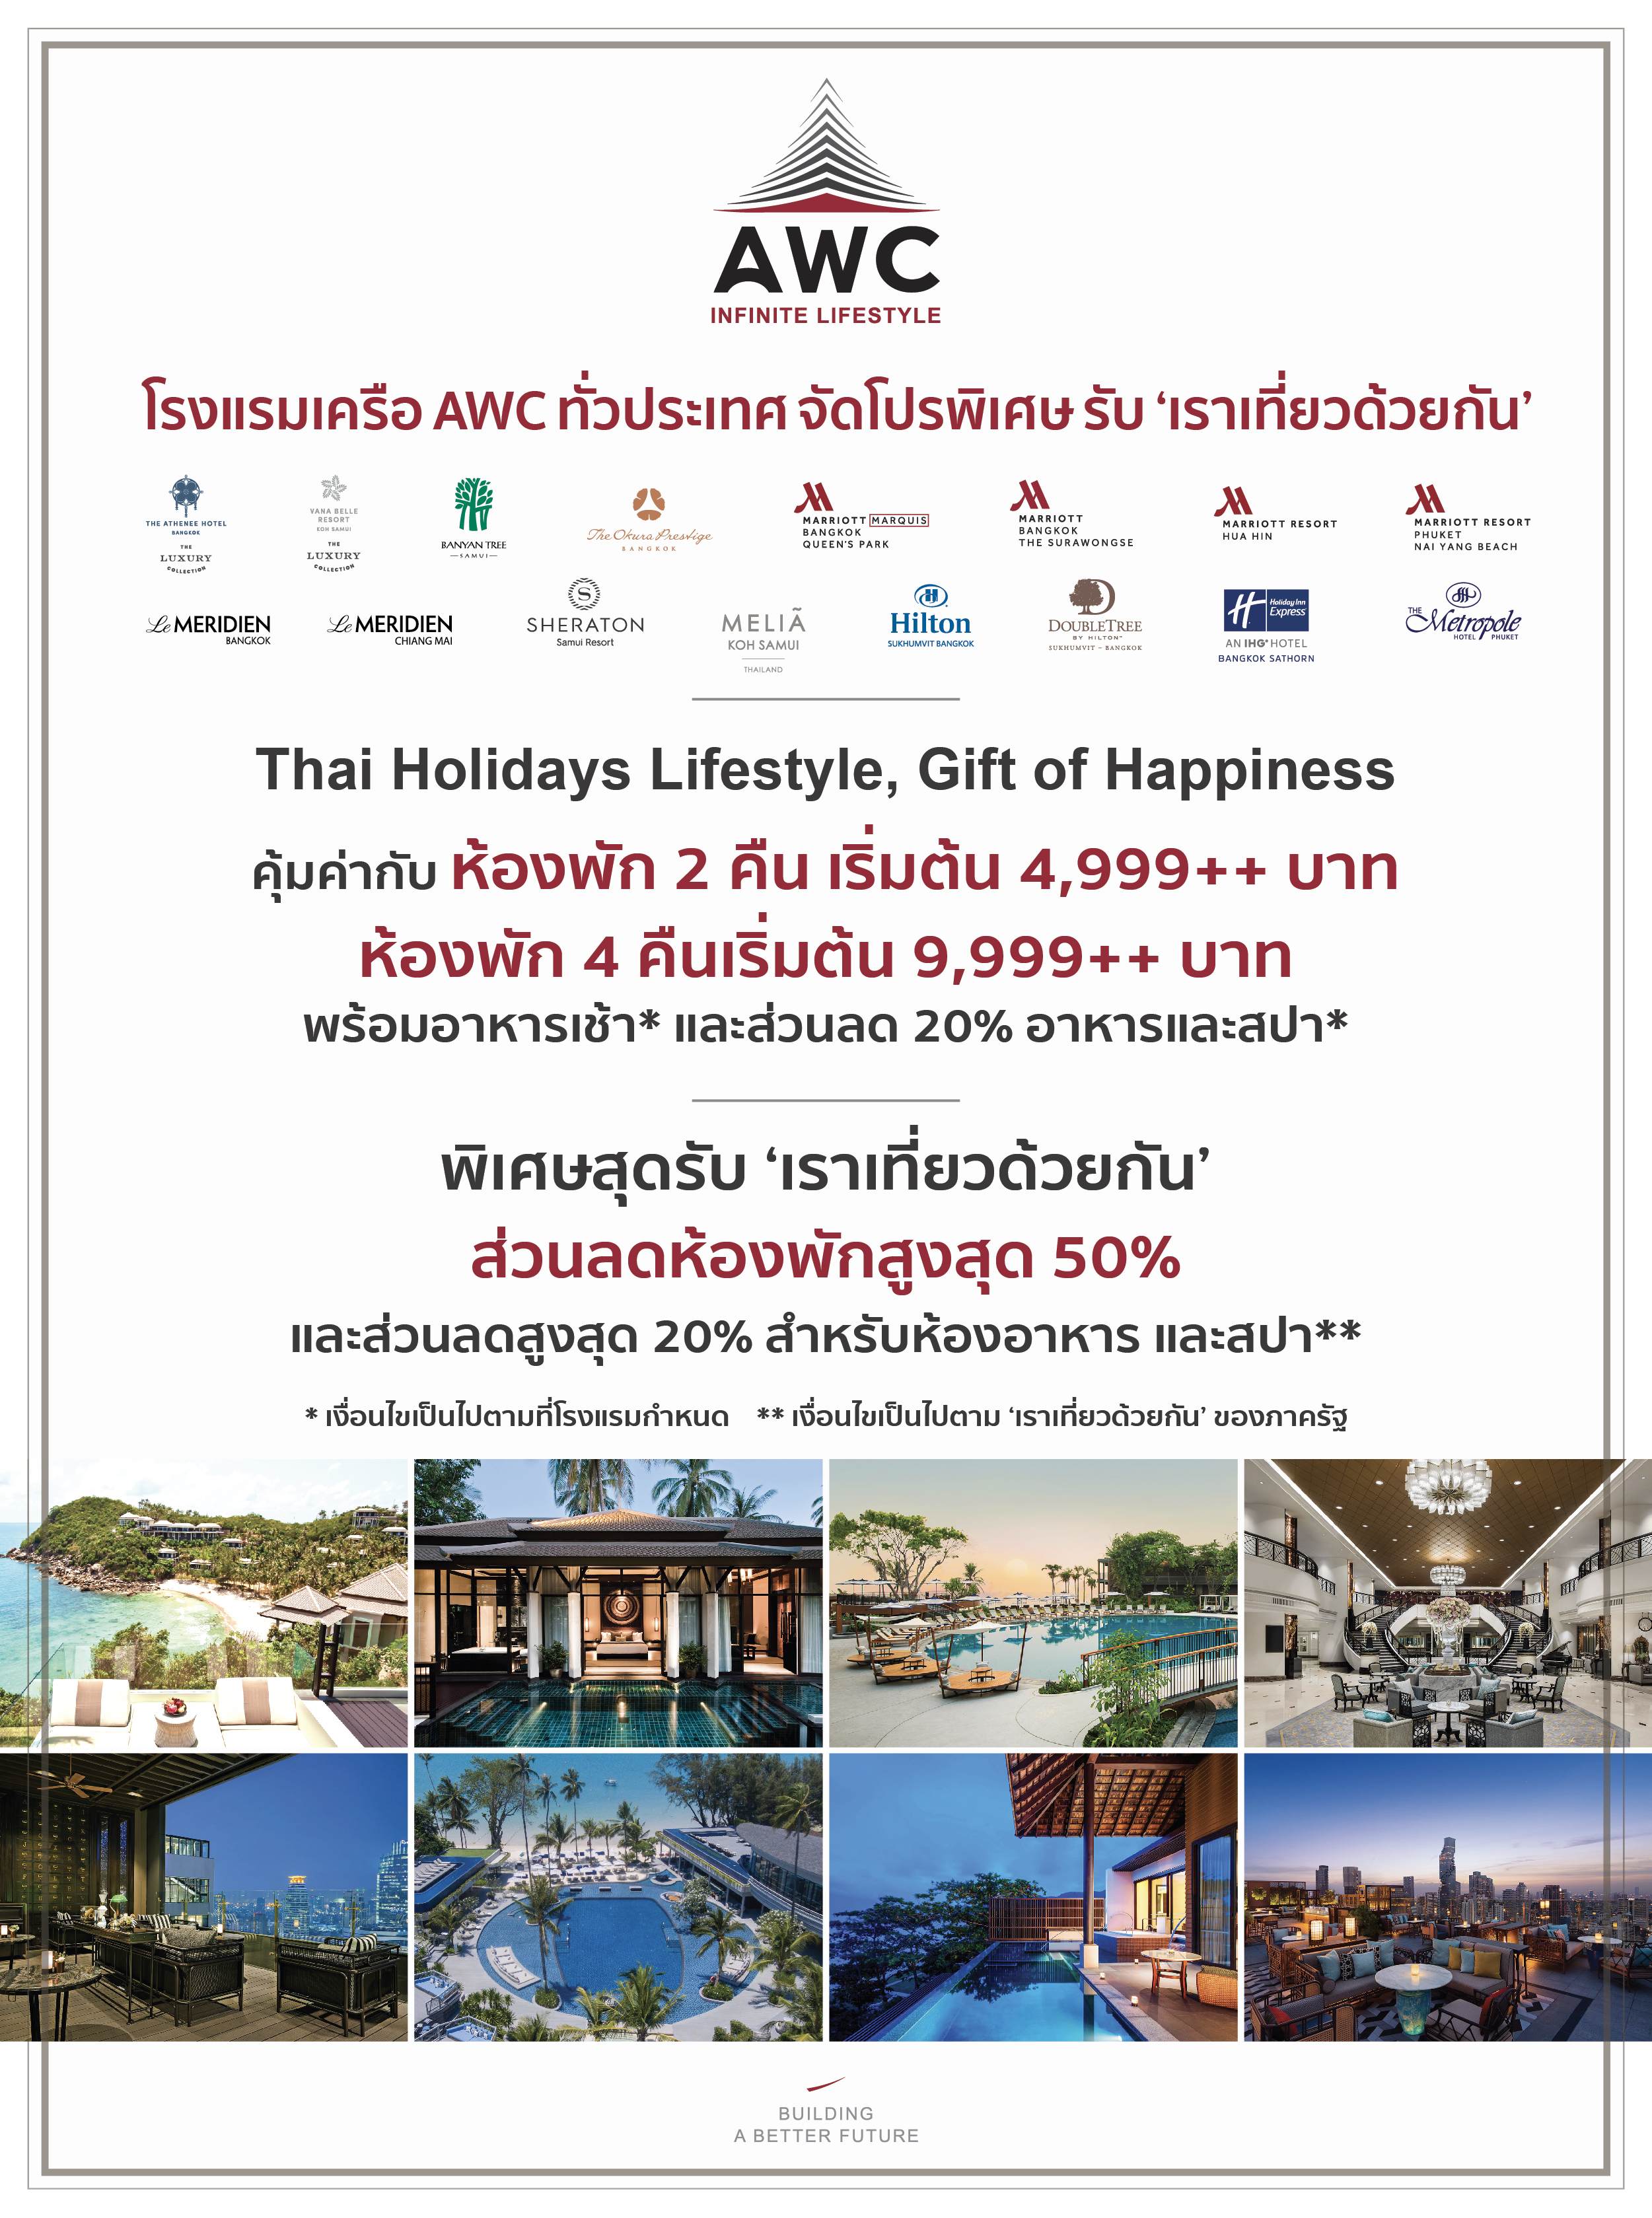 awc-hotels-special-campaigns-thai-holidays-lifestyle-promotion-banner-763x1024.jpg